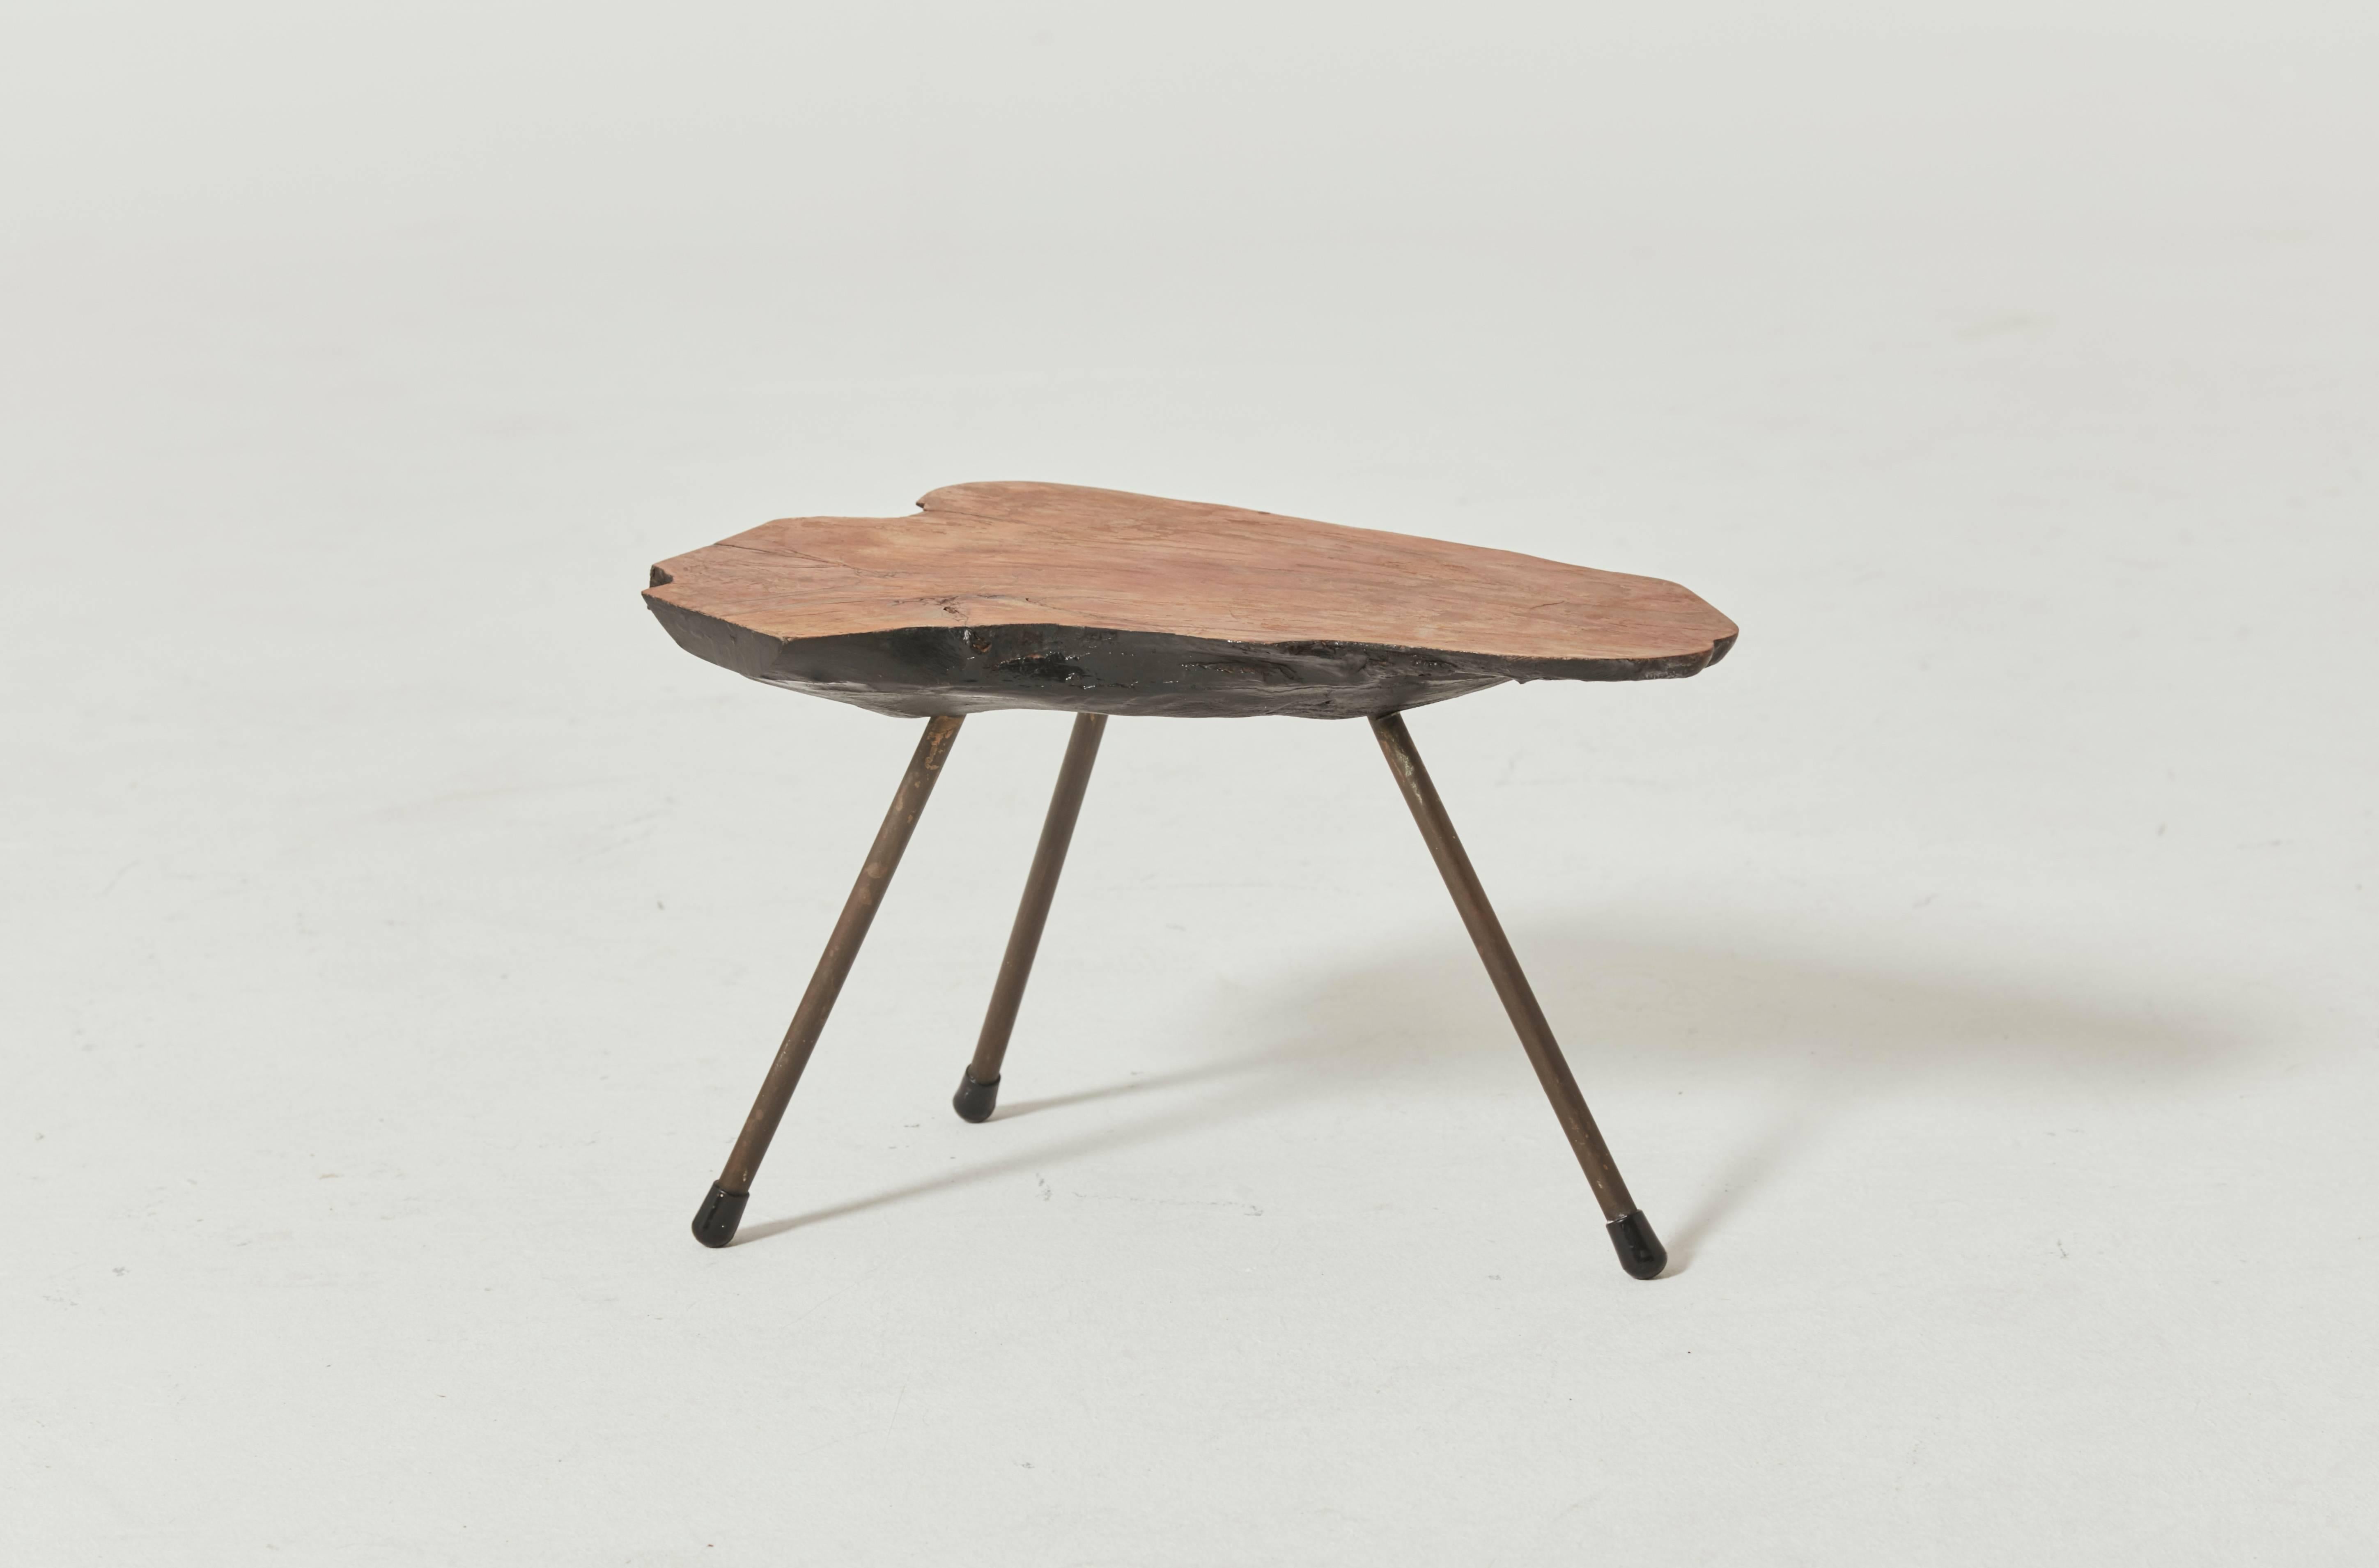 Small and low midcentury tree trunk table or pedestal attributed to Carl Aubock, Vienna, Austria, 1950s. Unmarked. From a private home in Vienna.